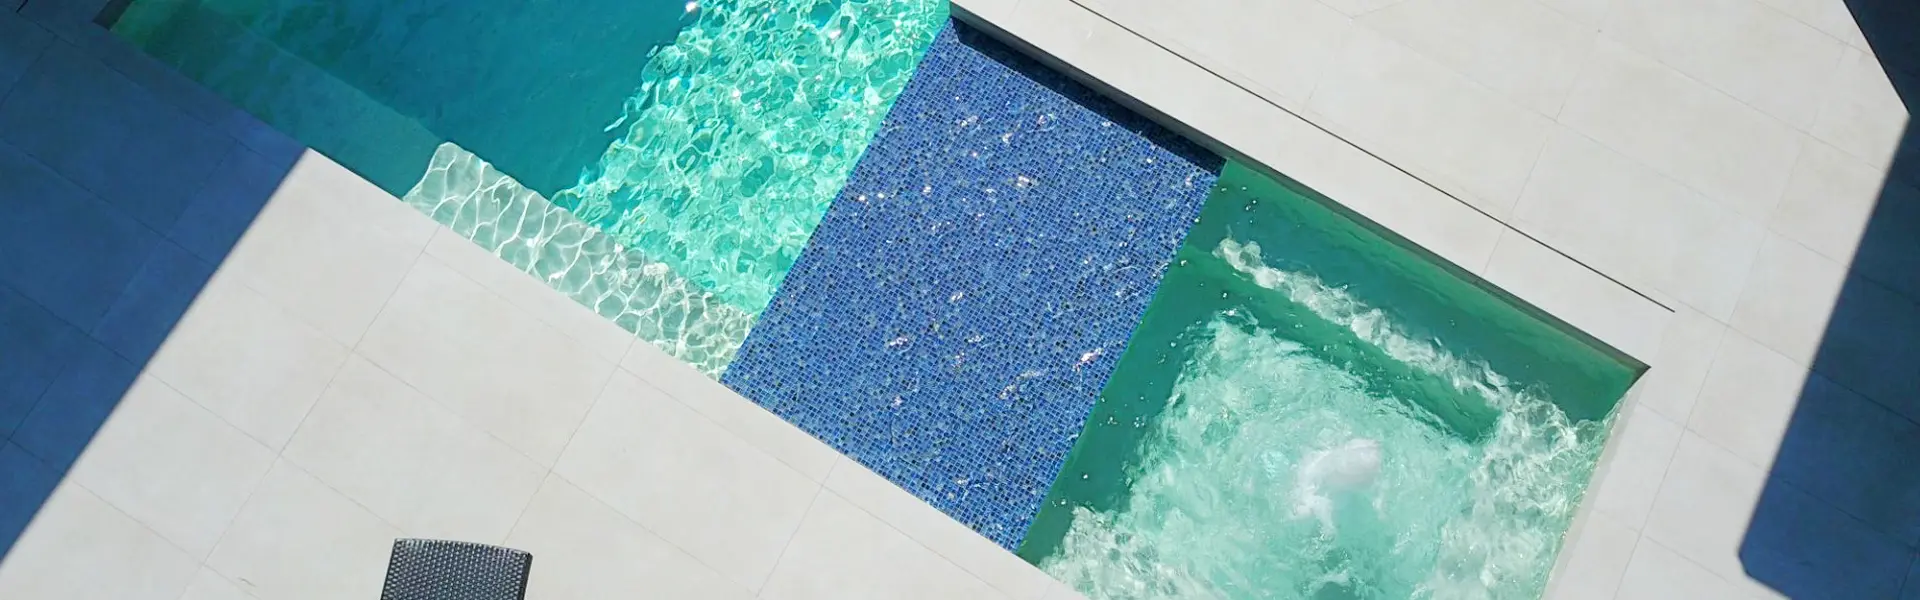 Architectural Pools